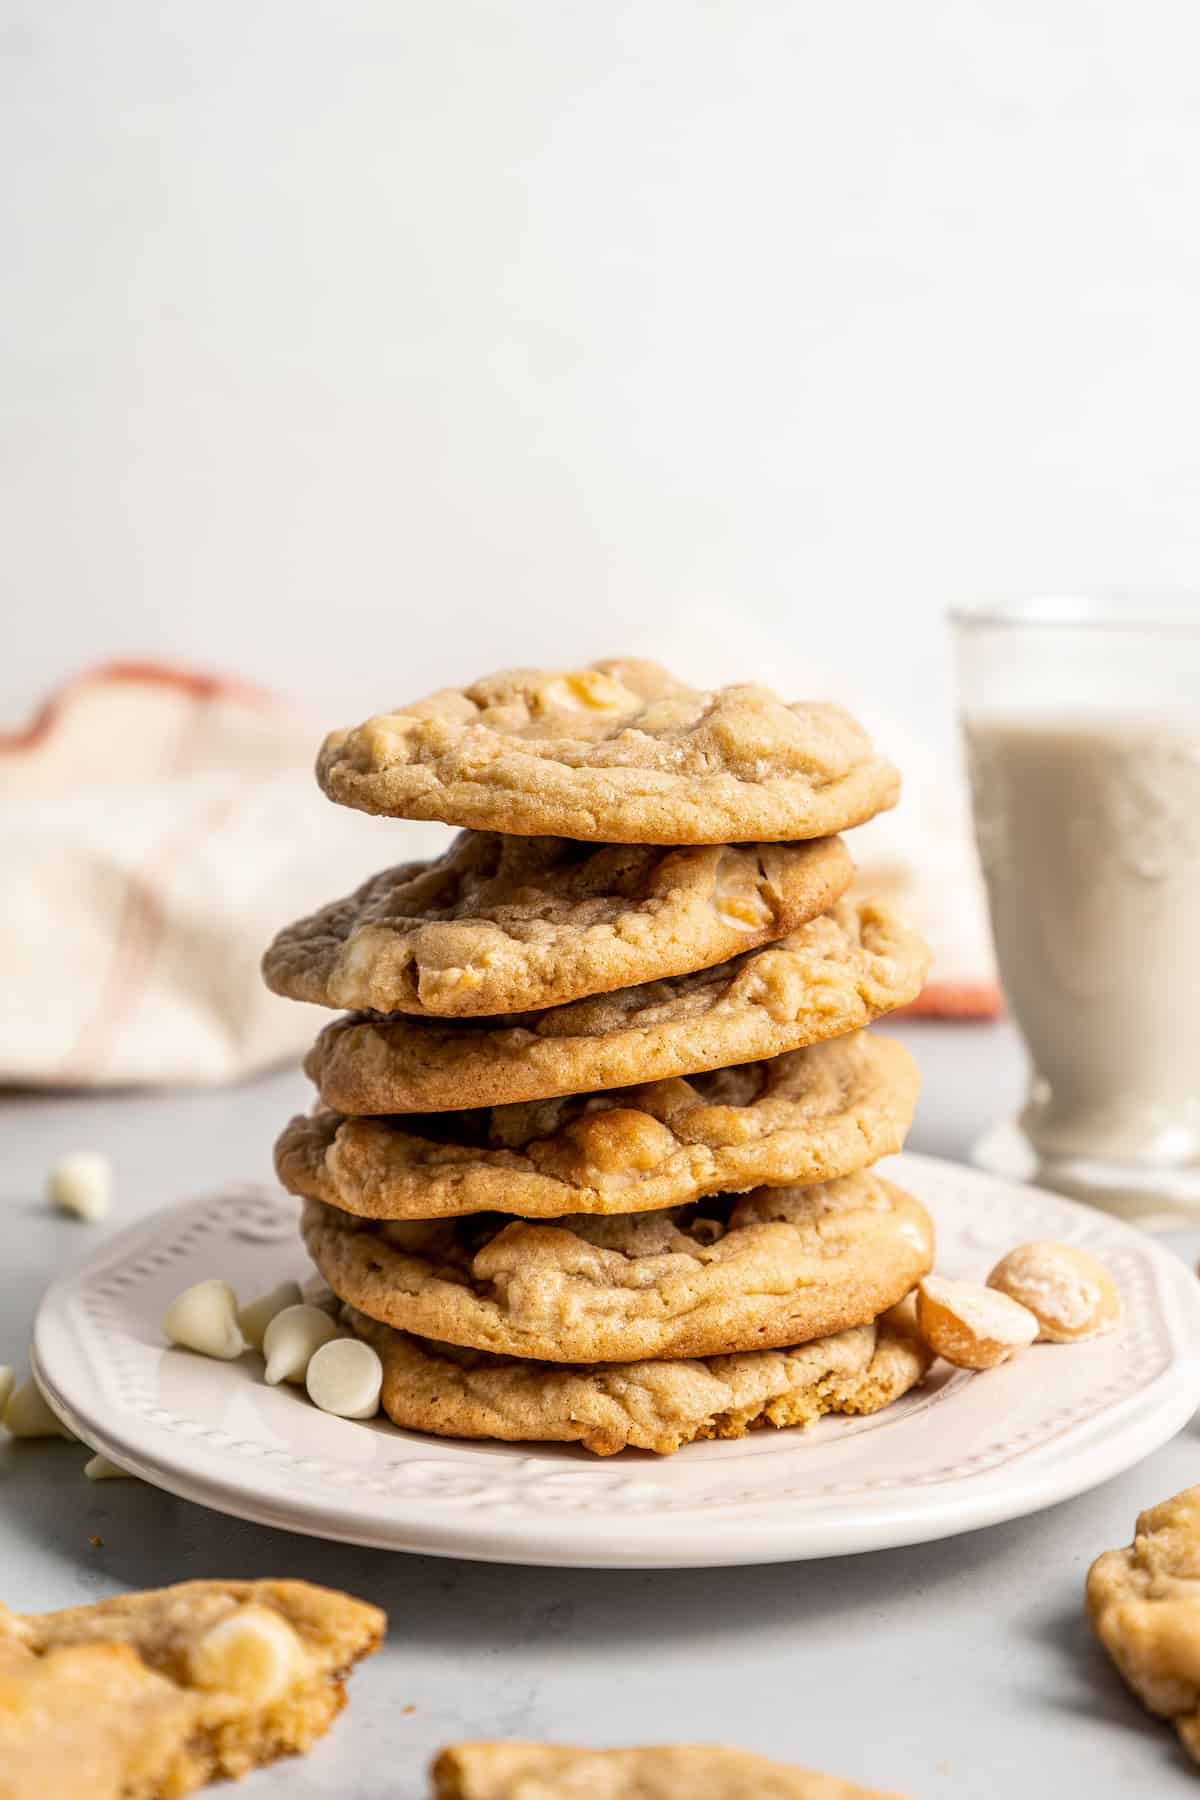 A plate with a stack of six white chocolate chip cookies, surrounded by white chocolate chips, with a glass of milk in the background